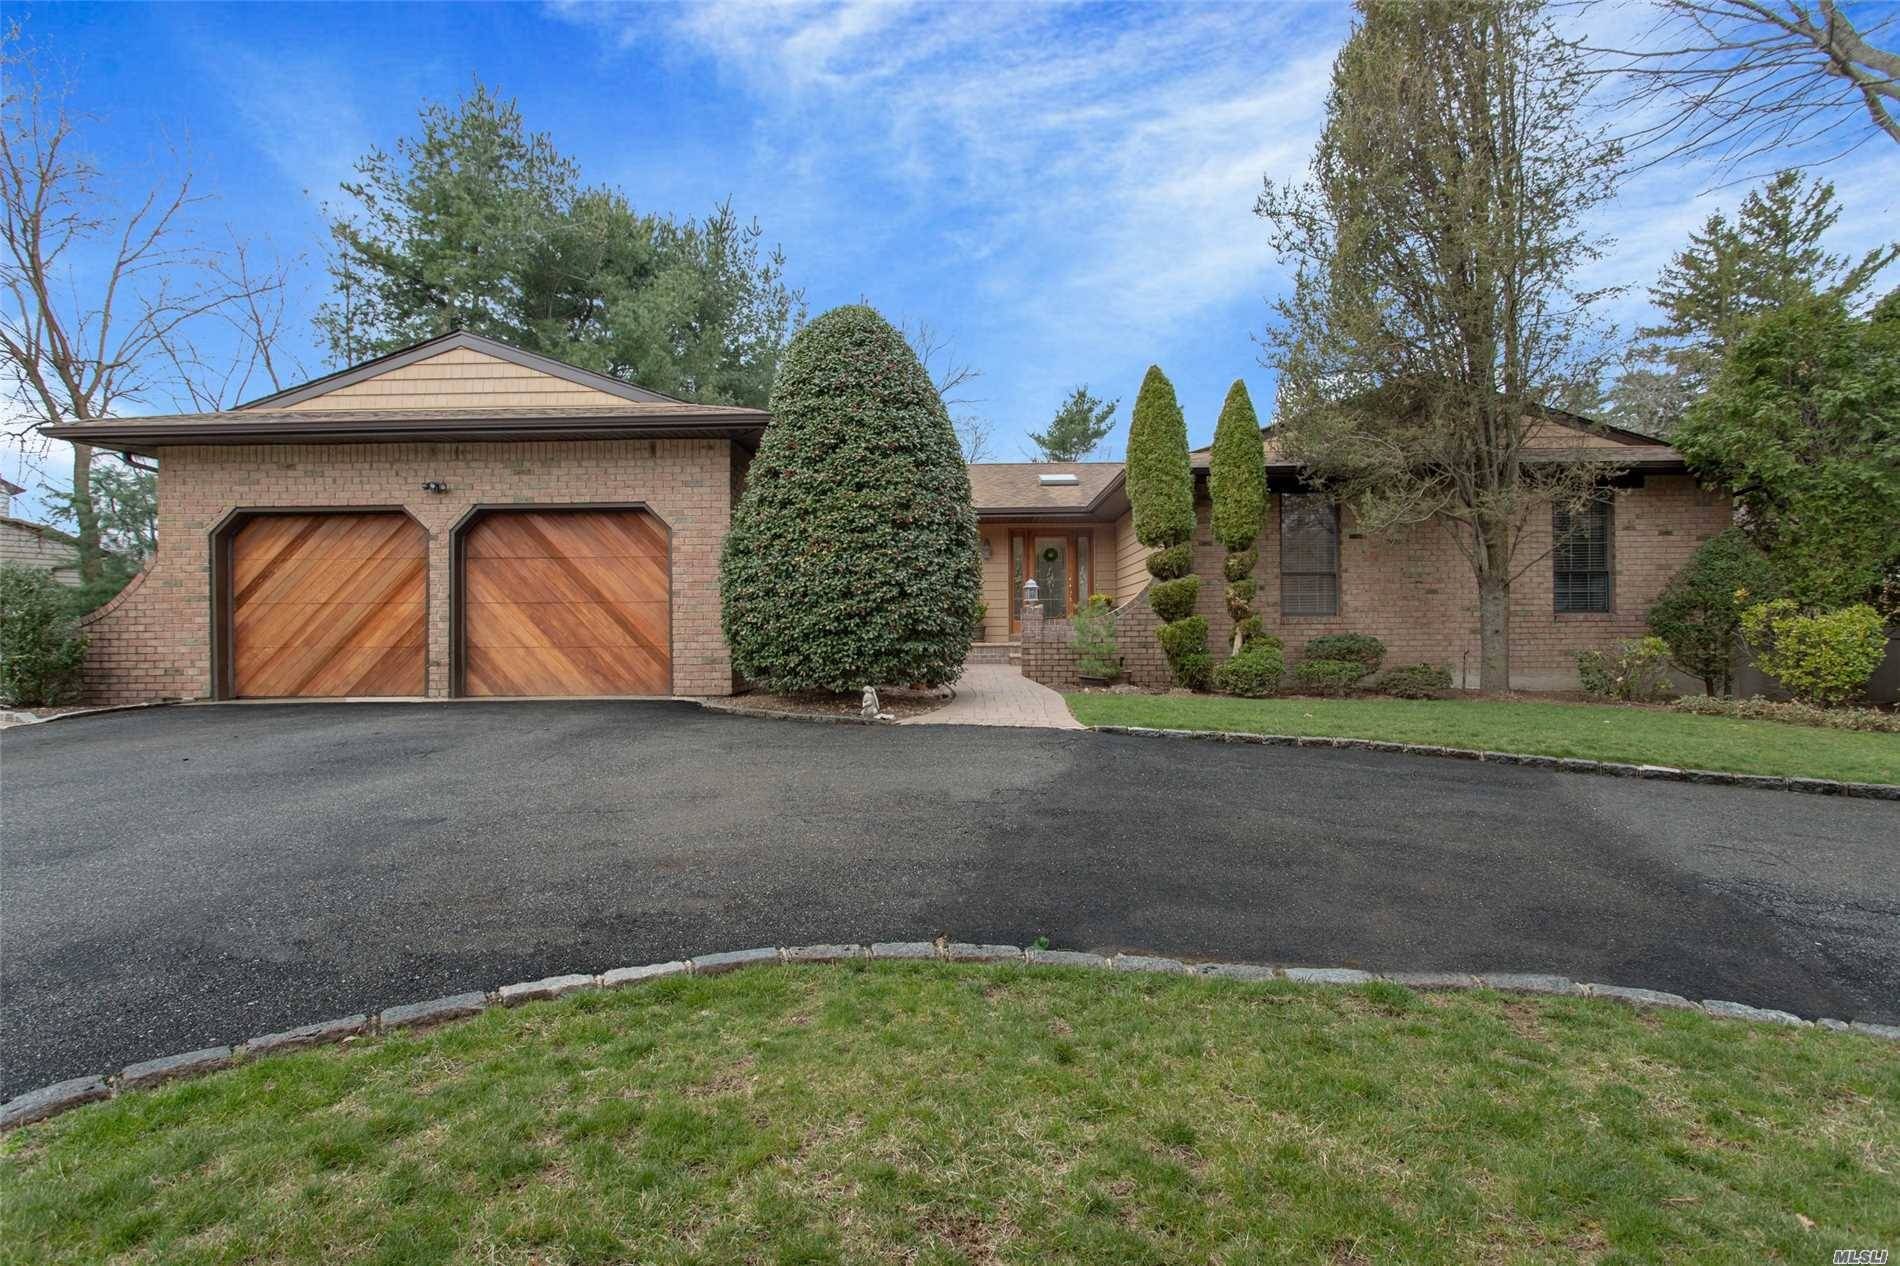 Sprawling Ranch In Desirable North Syosset Pelican Pond Estates Sited On 1 2 Acre Of Flat Park like Property.